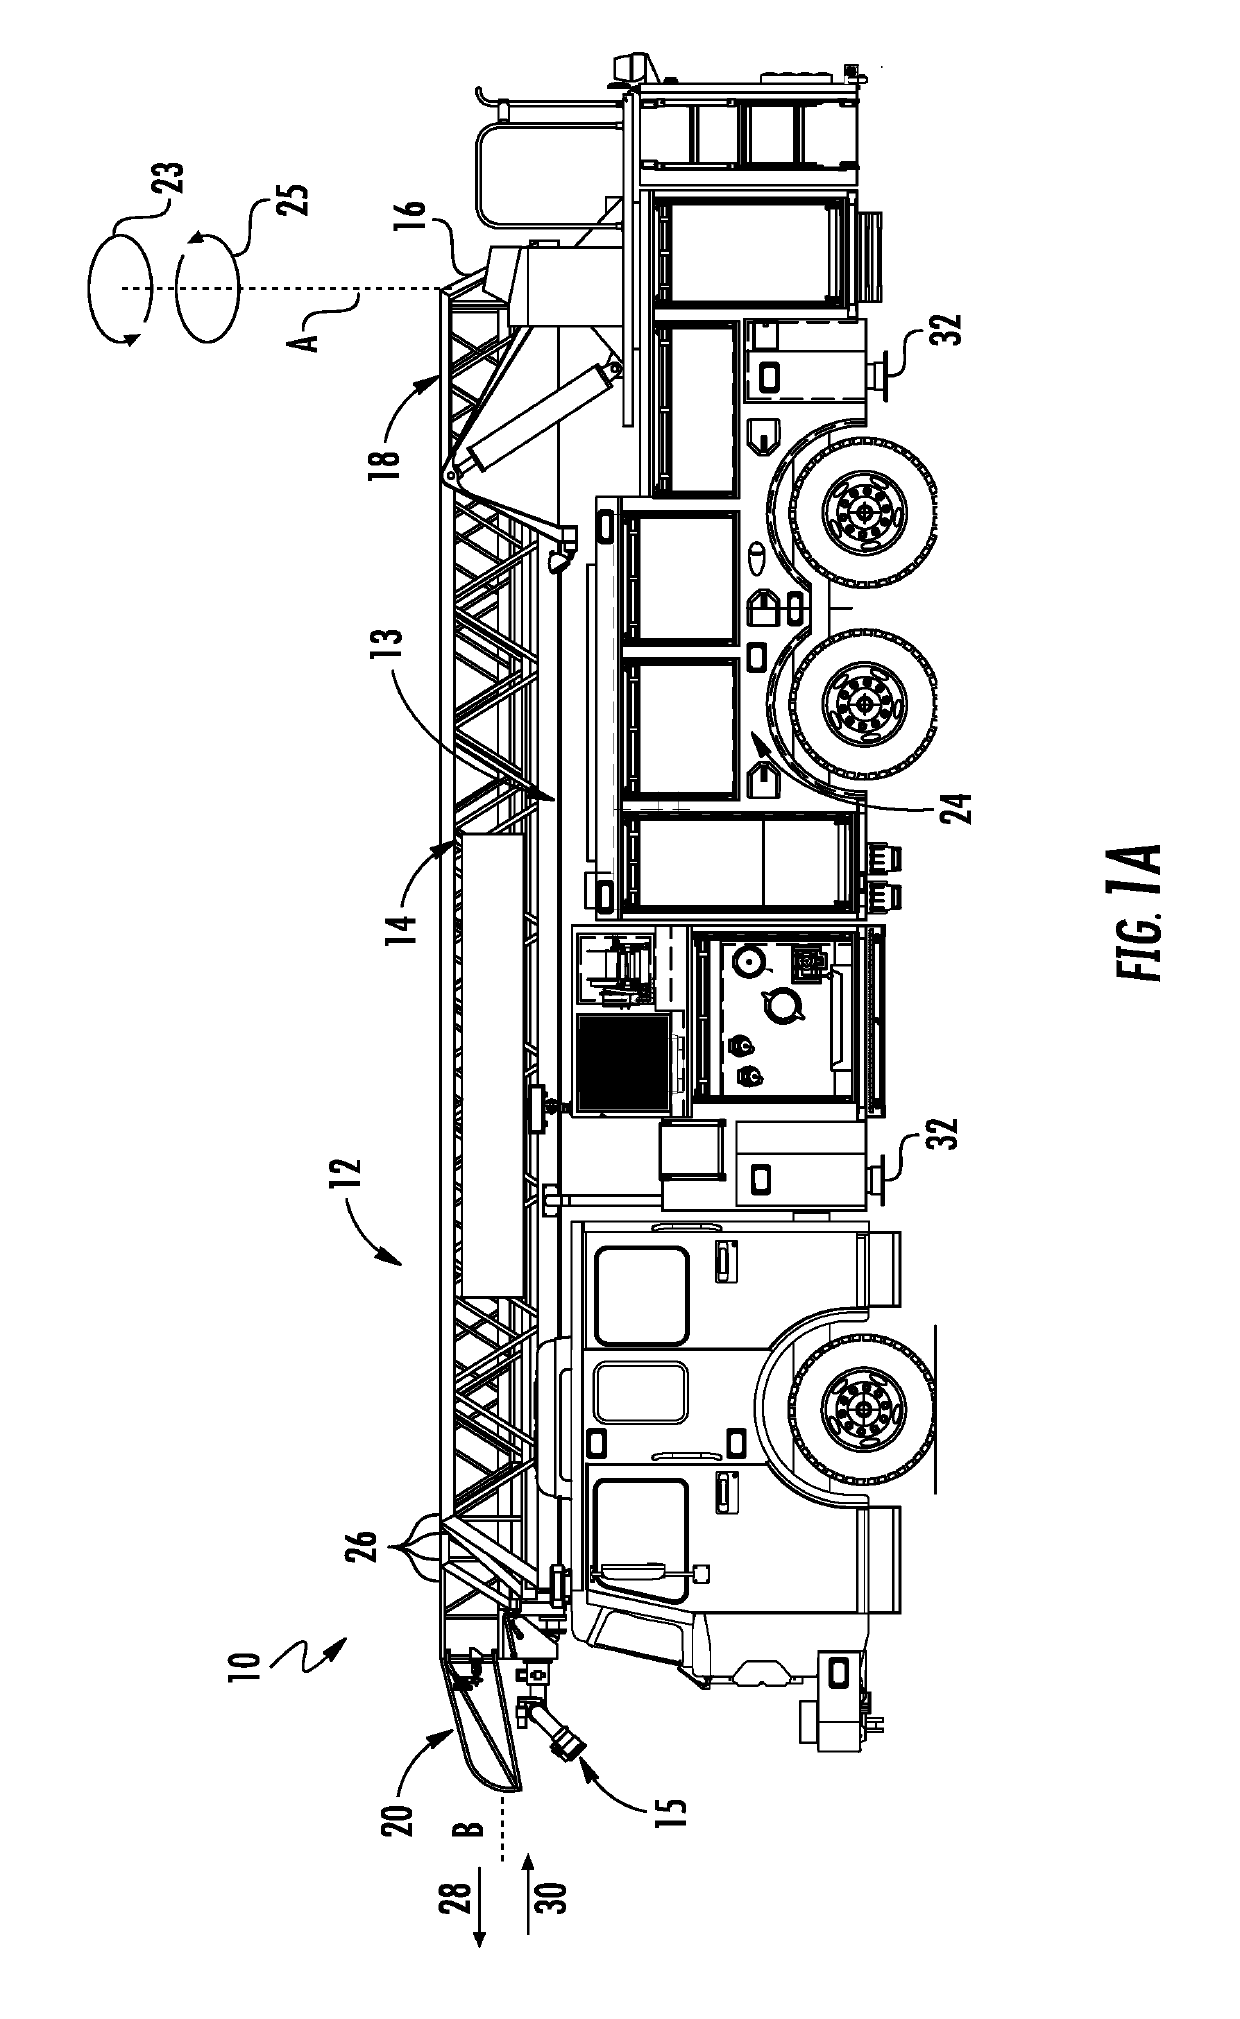 Multi-stance aerial device control and display